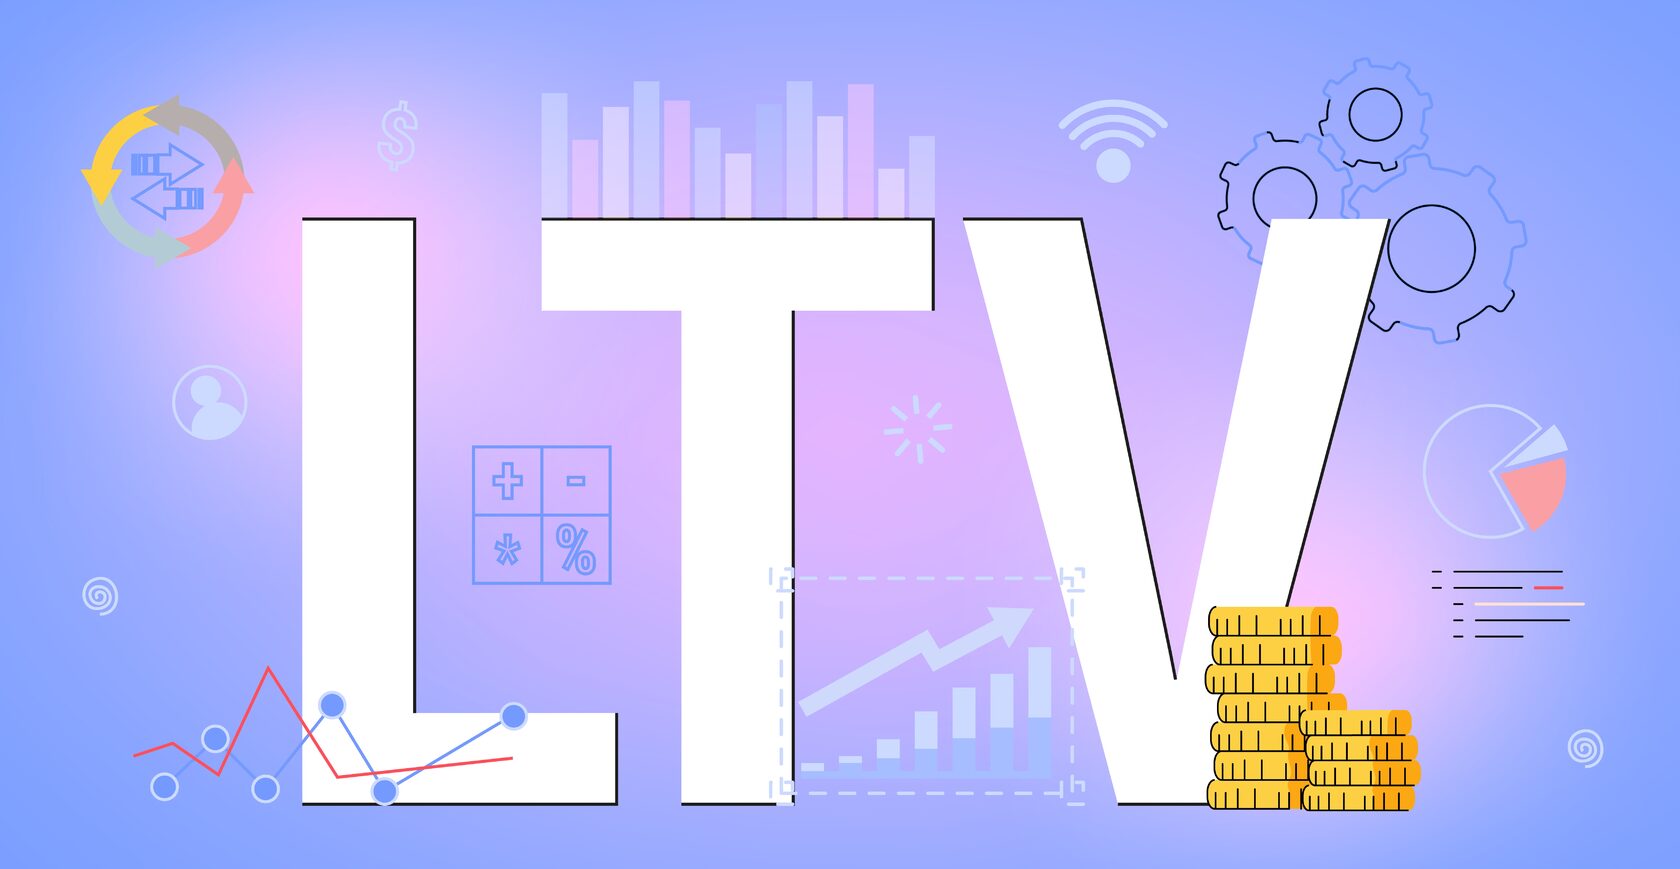 Thinking LTV with Rewarded Video Ad Monetization